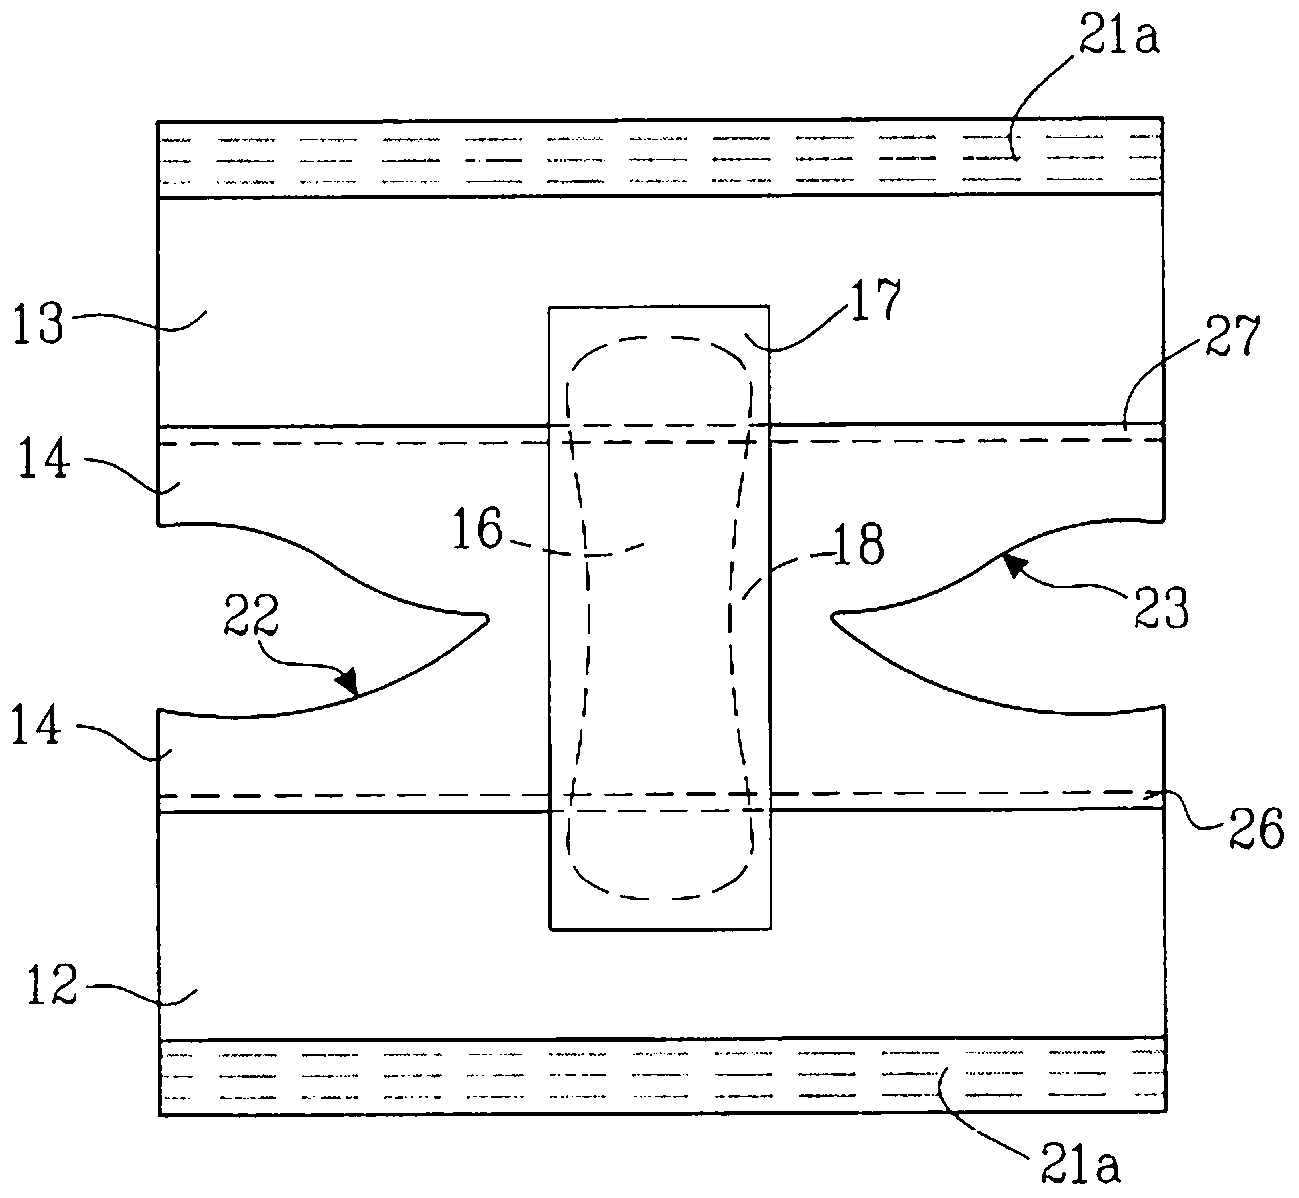 Absorbent boxer shorts with expanded crotch panel and method of making thereof